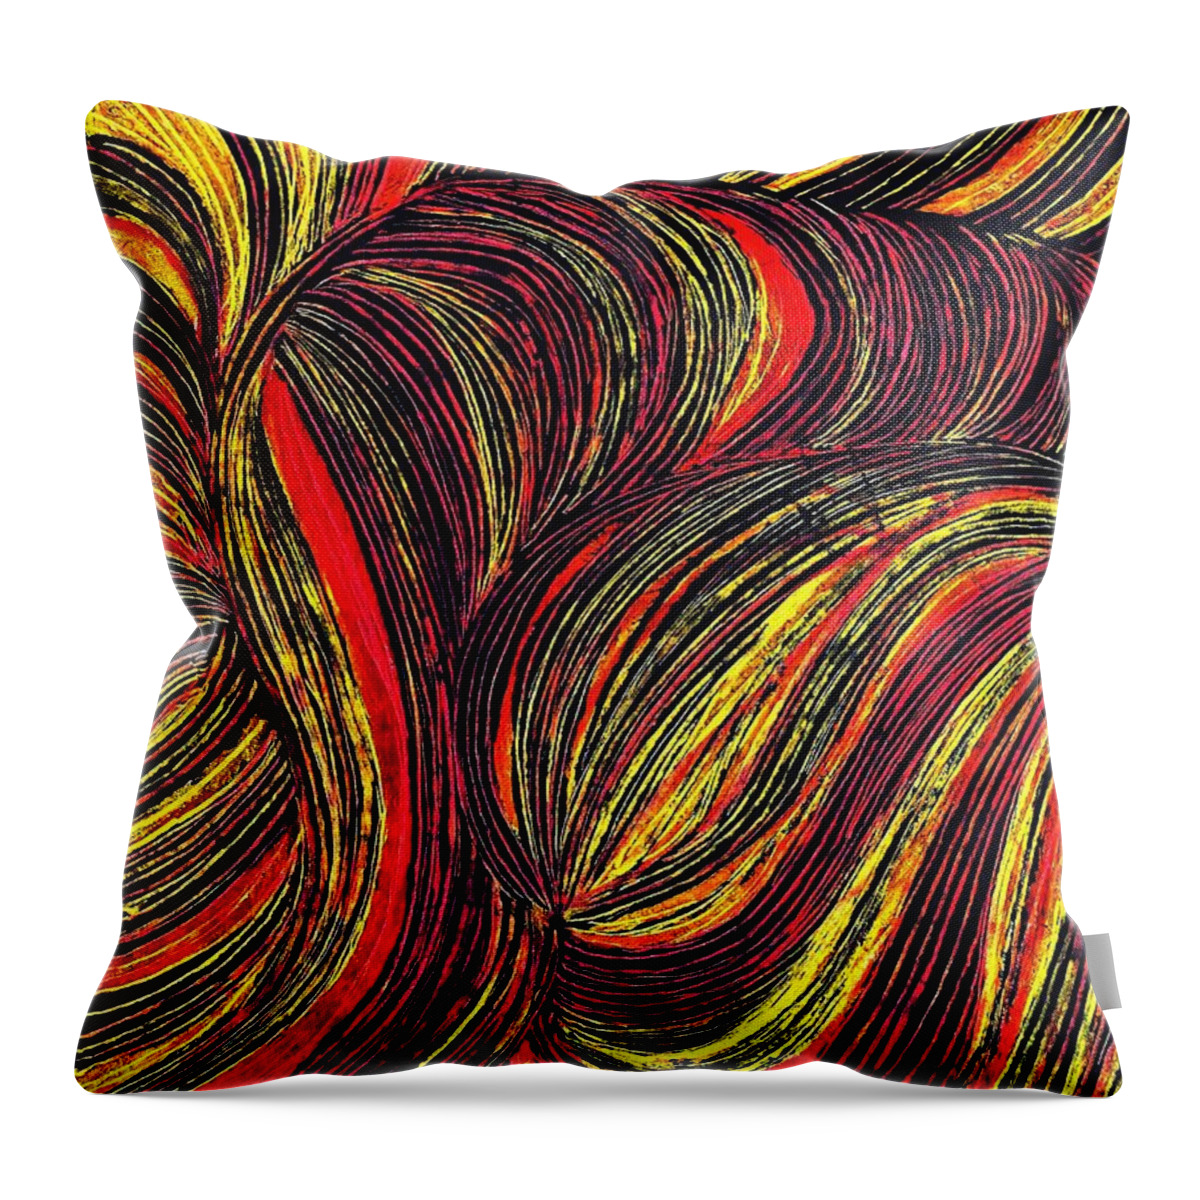 Curve Throw Pillow featuring the drawing Curved Lines 3 by Sarah Loft